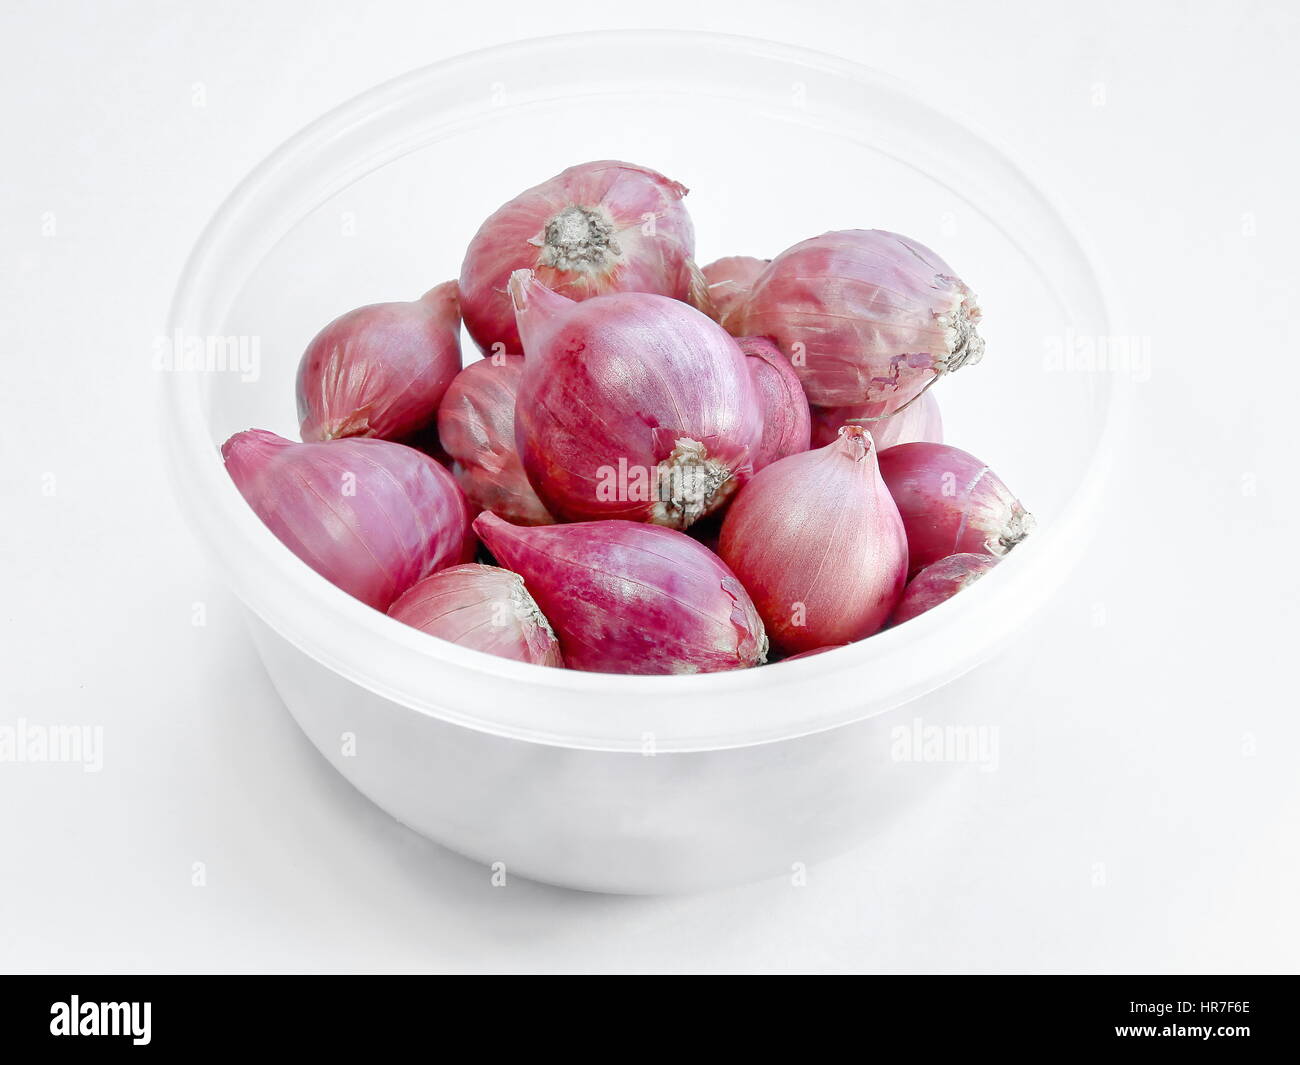 Premium Photo  Shallots or red onion purple shallots on basket fresh  shallot for medicinal products or herbs and spices thai food made from this  raw shallot